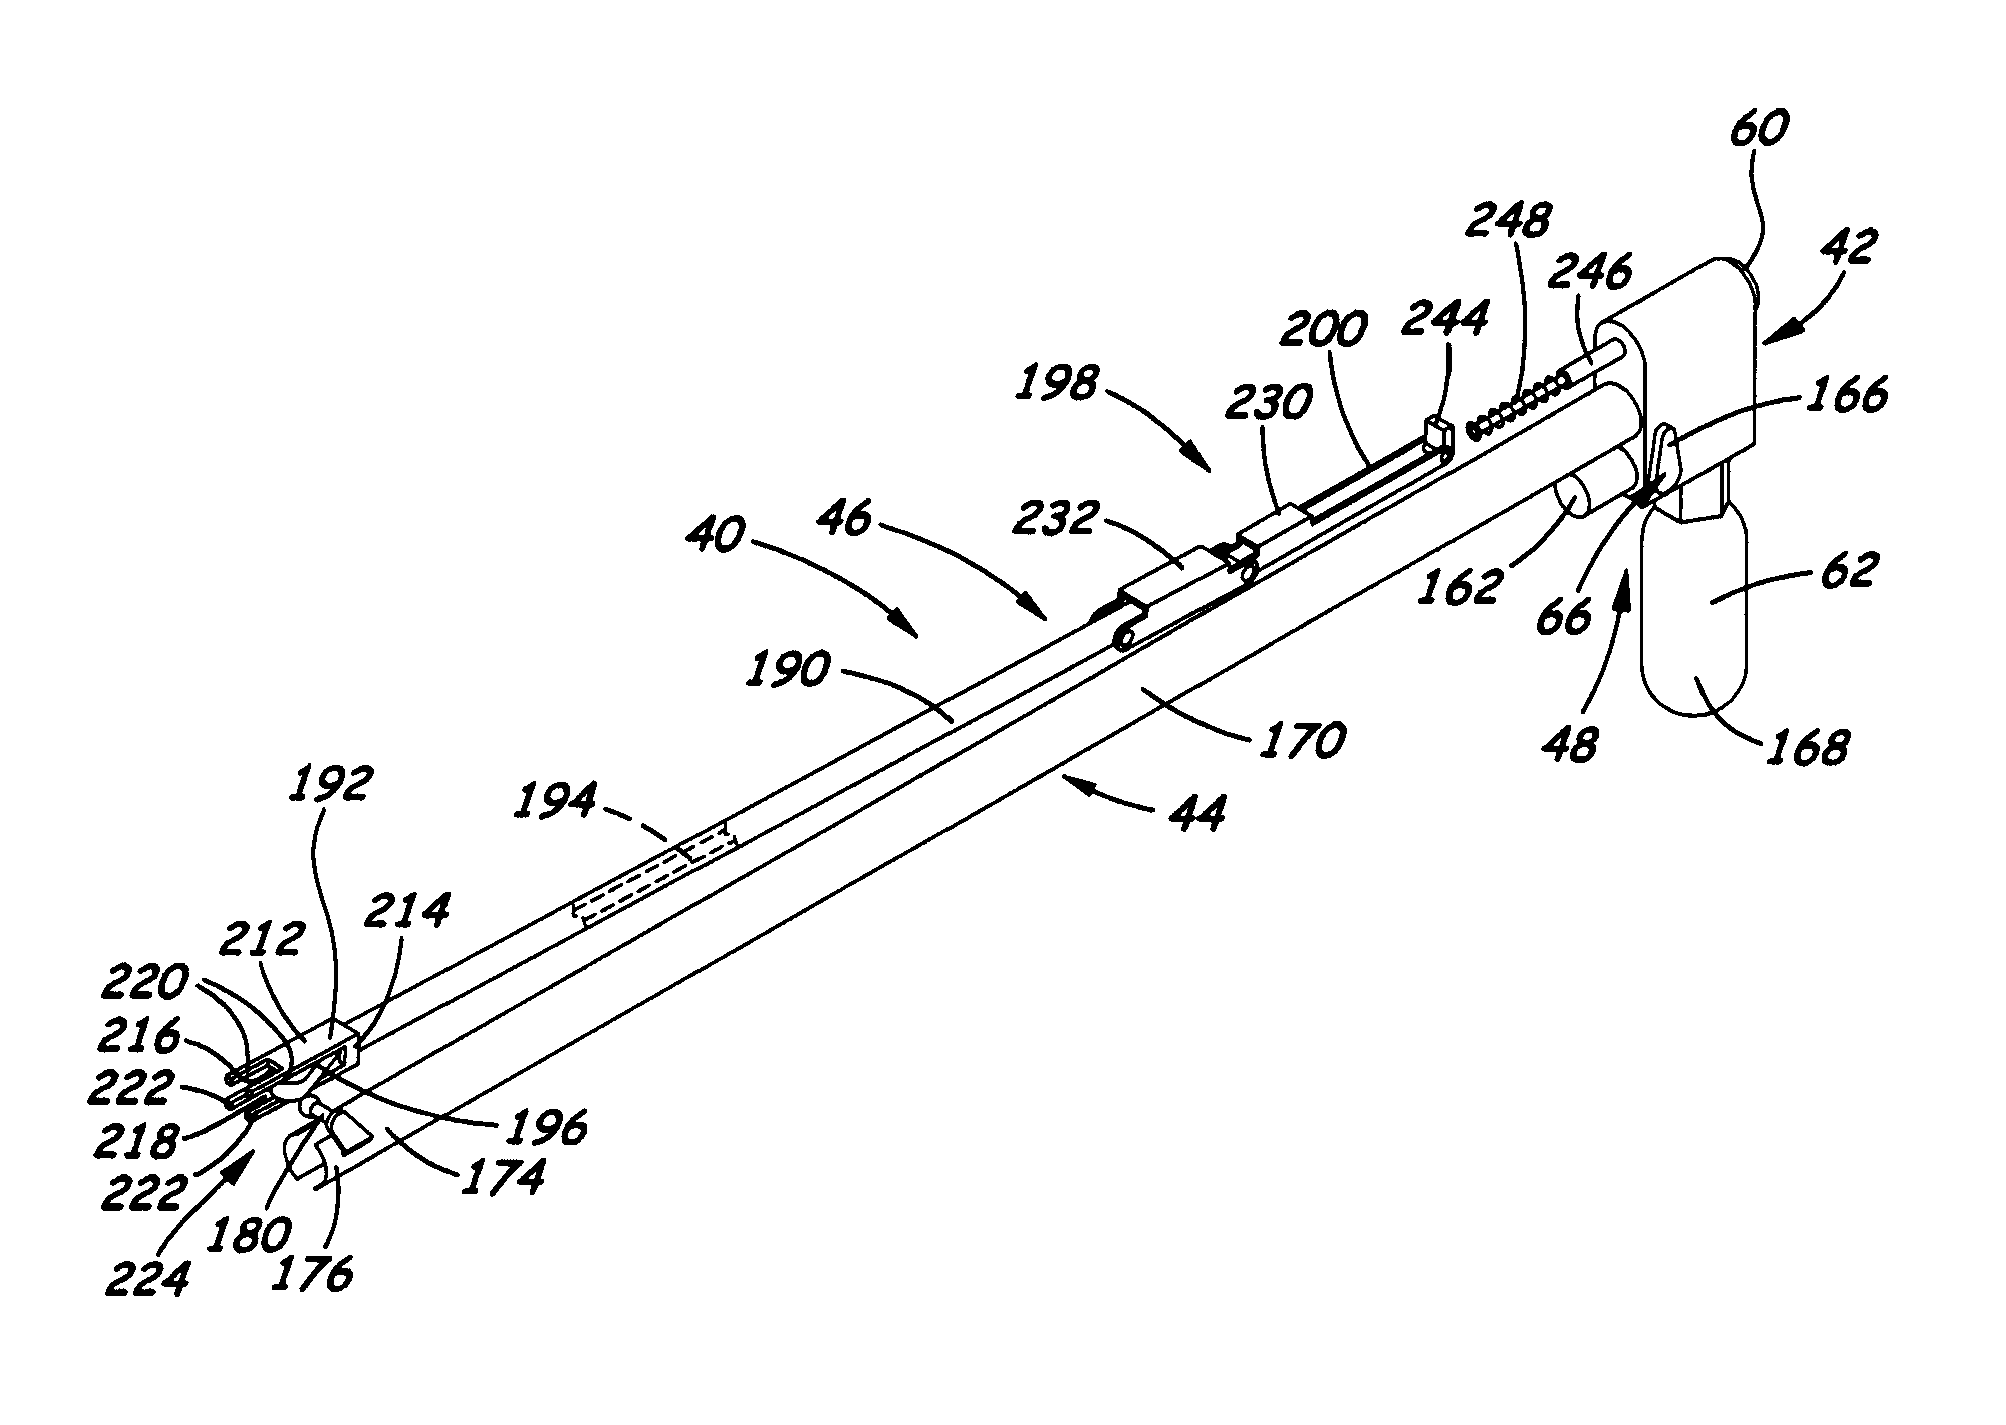 Apparatus and method for applying sustained tension on a tether